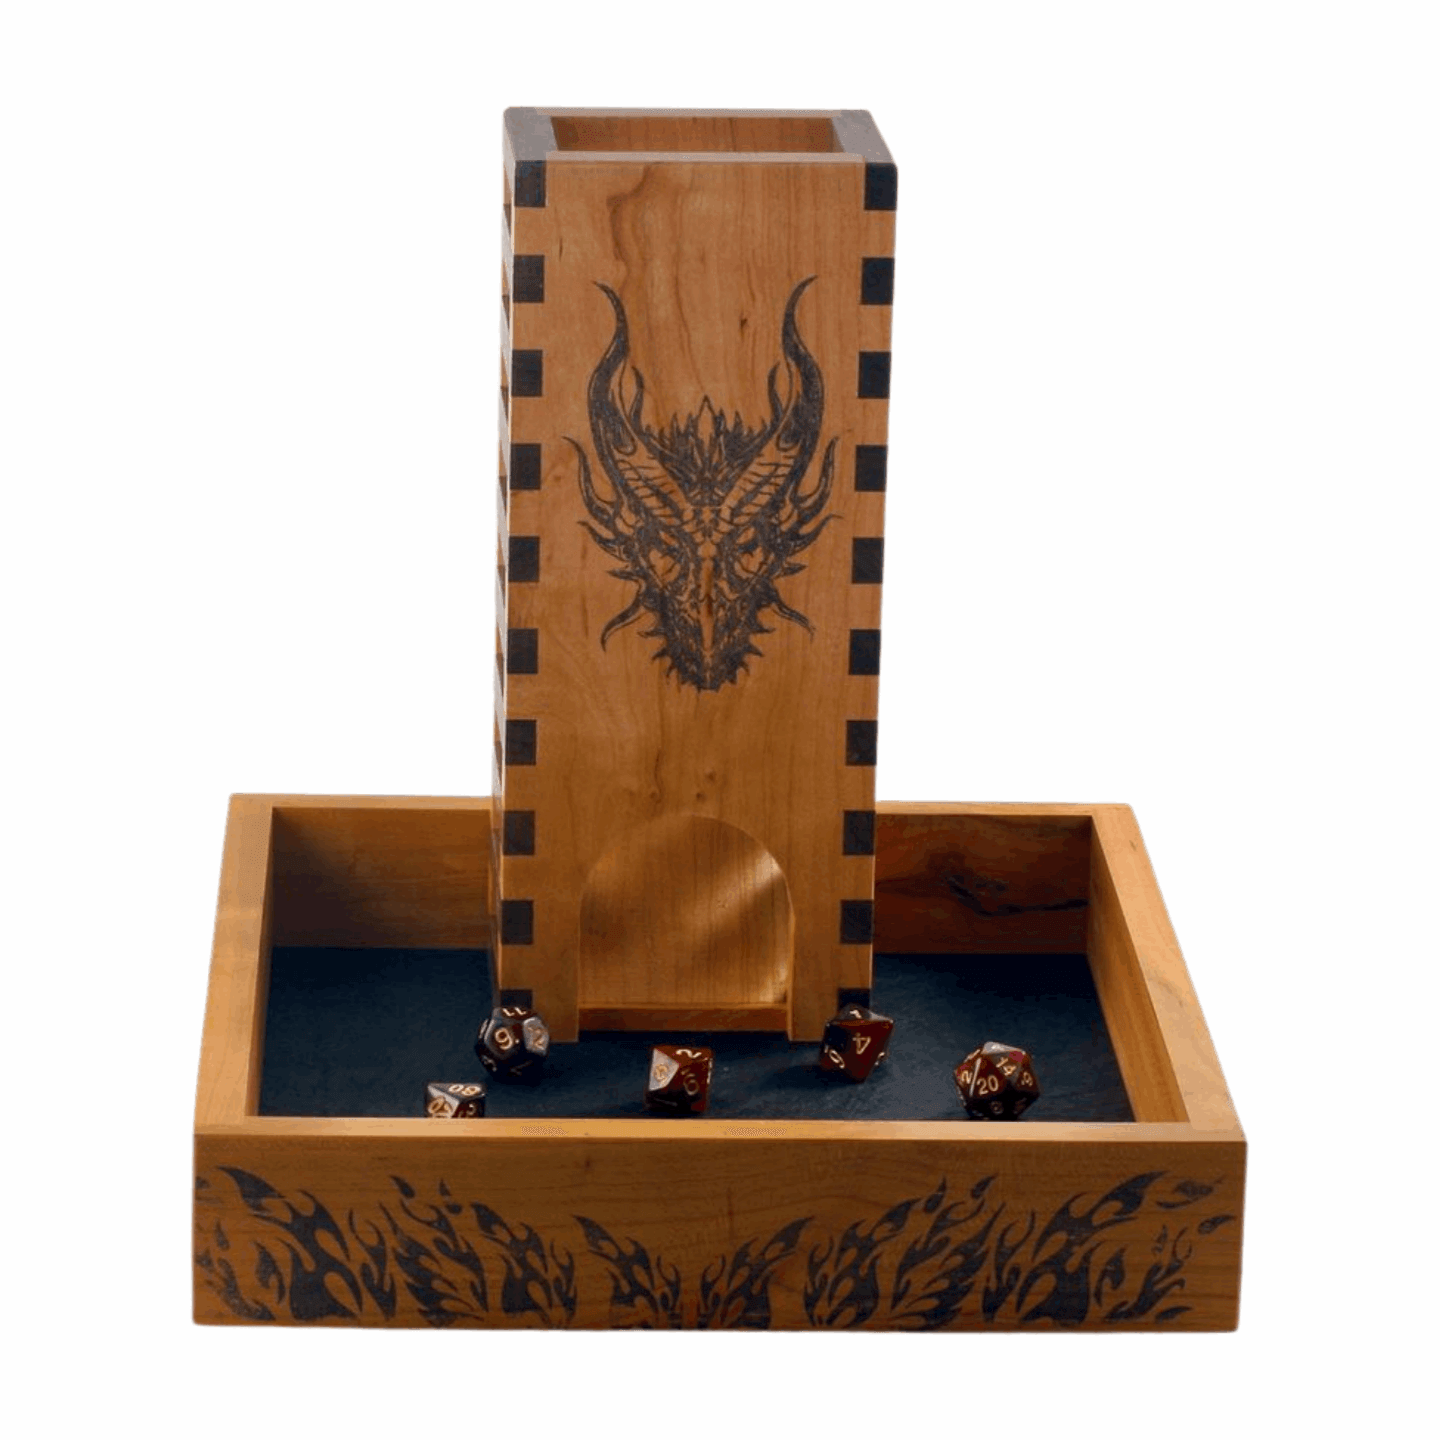 Dragon Dice Roller in Wooden Dice Tray with Flame Design and 5 Red Dice